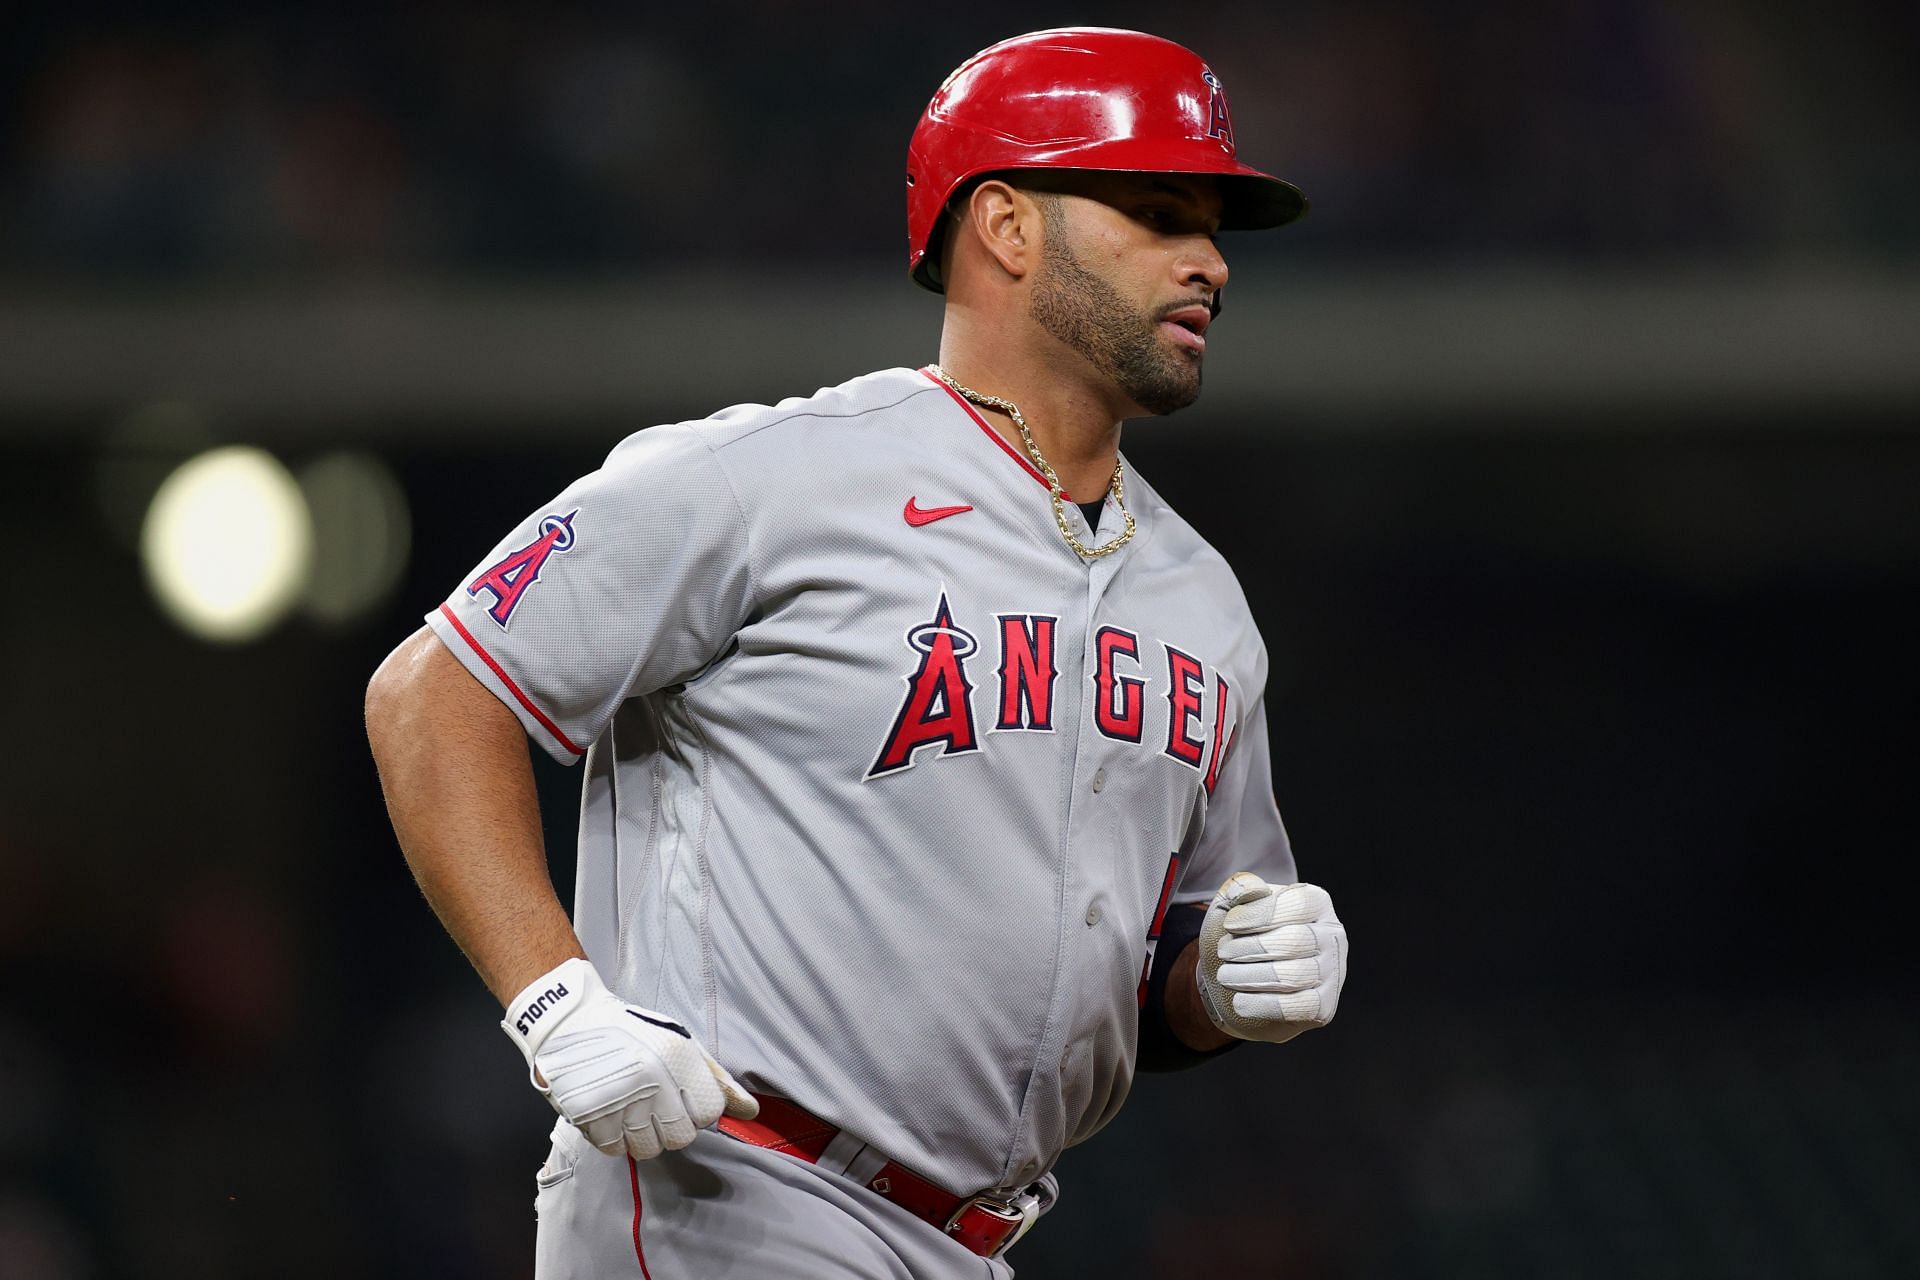 Albert Pujols to work with young players, be Angels ambassador